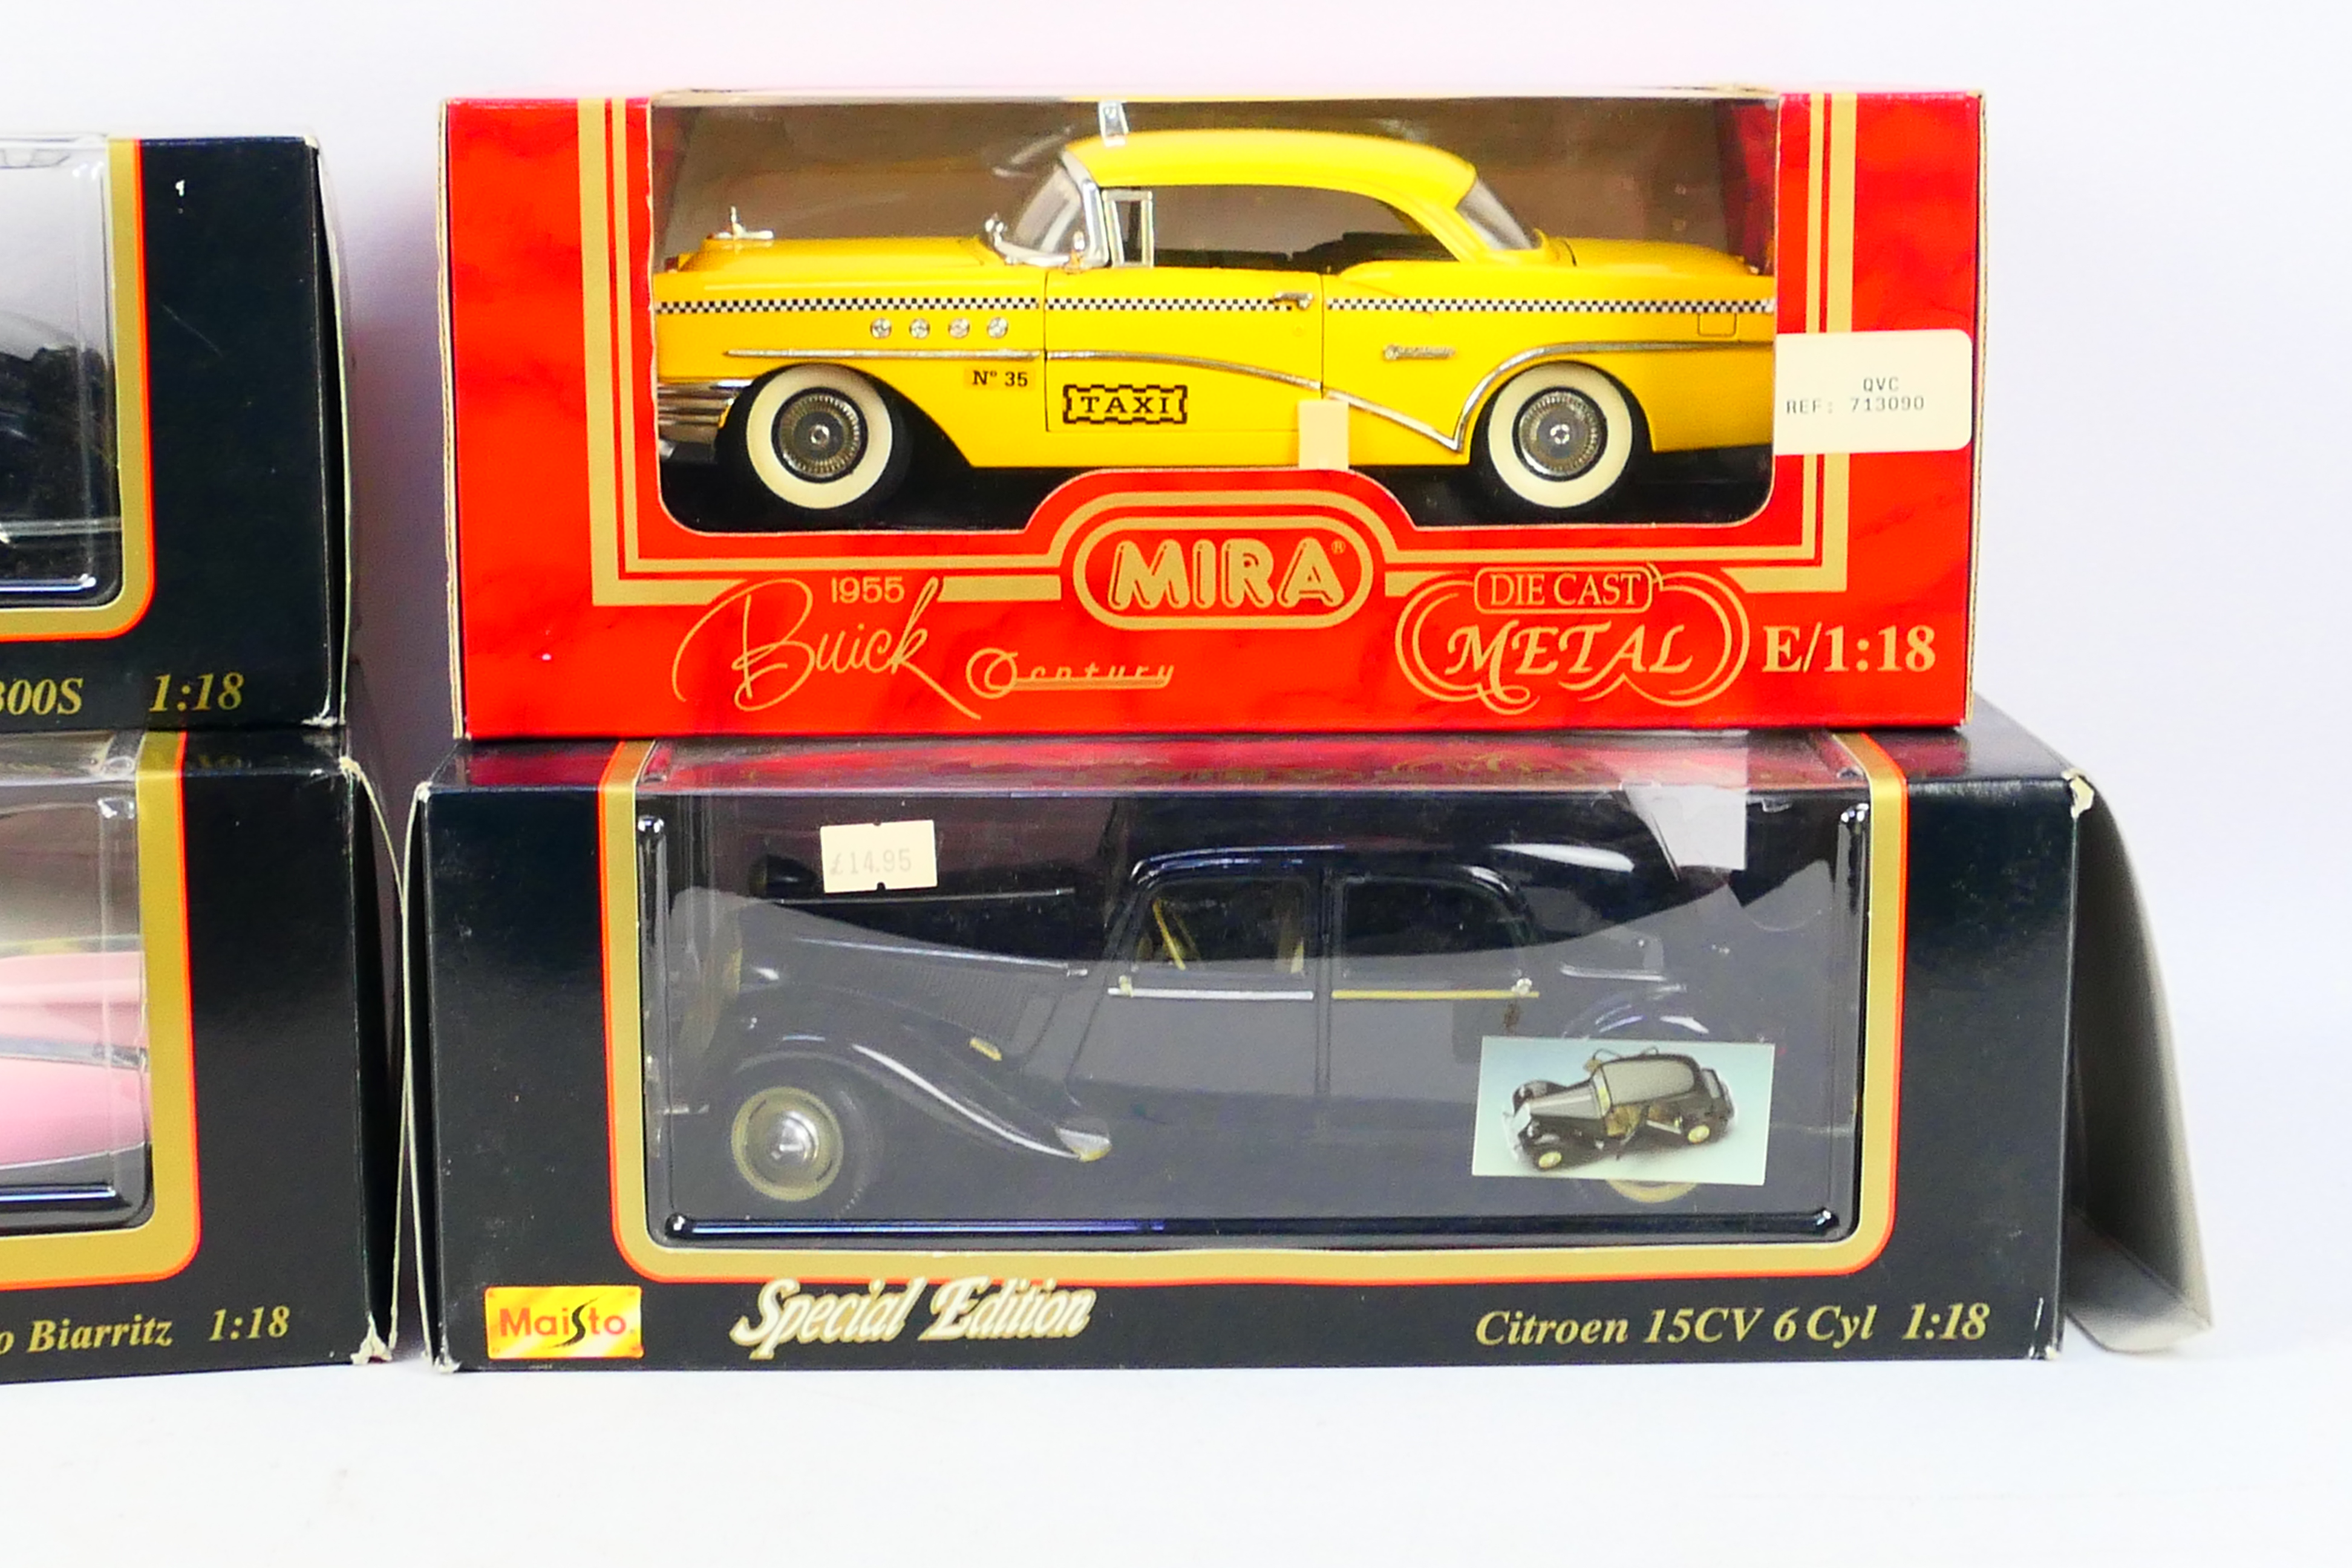 Maisto - Mira - Four boxed diecast 1:18 scale model cars. - Image 3 of 3